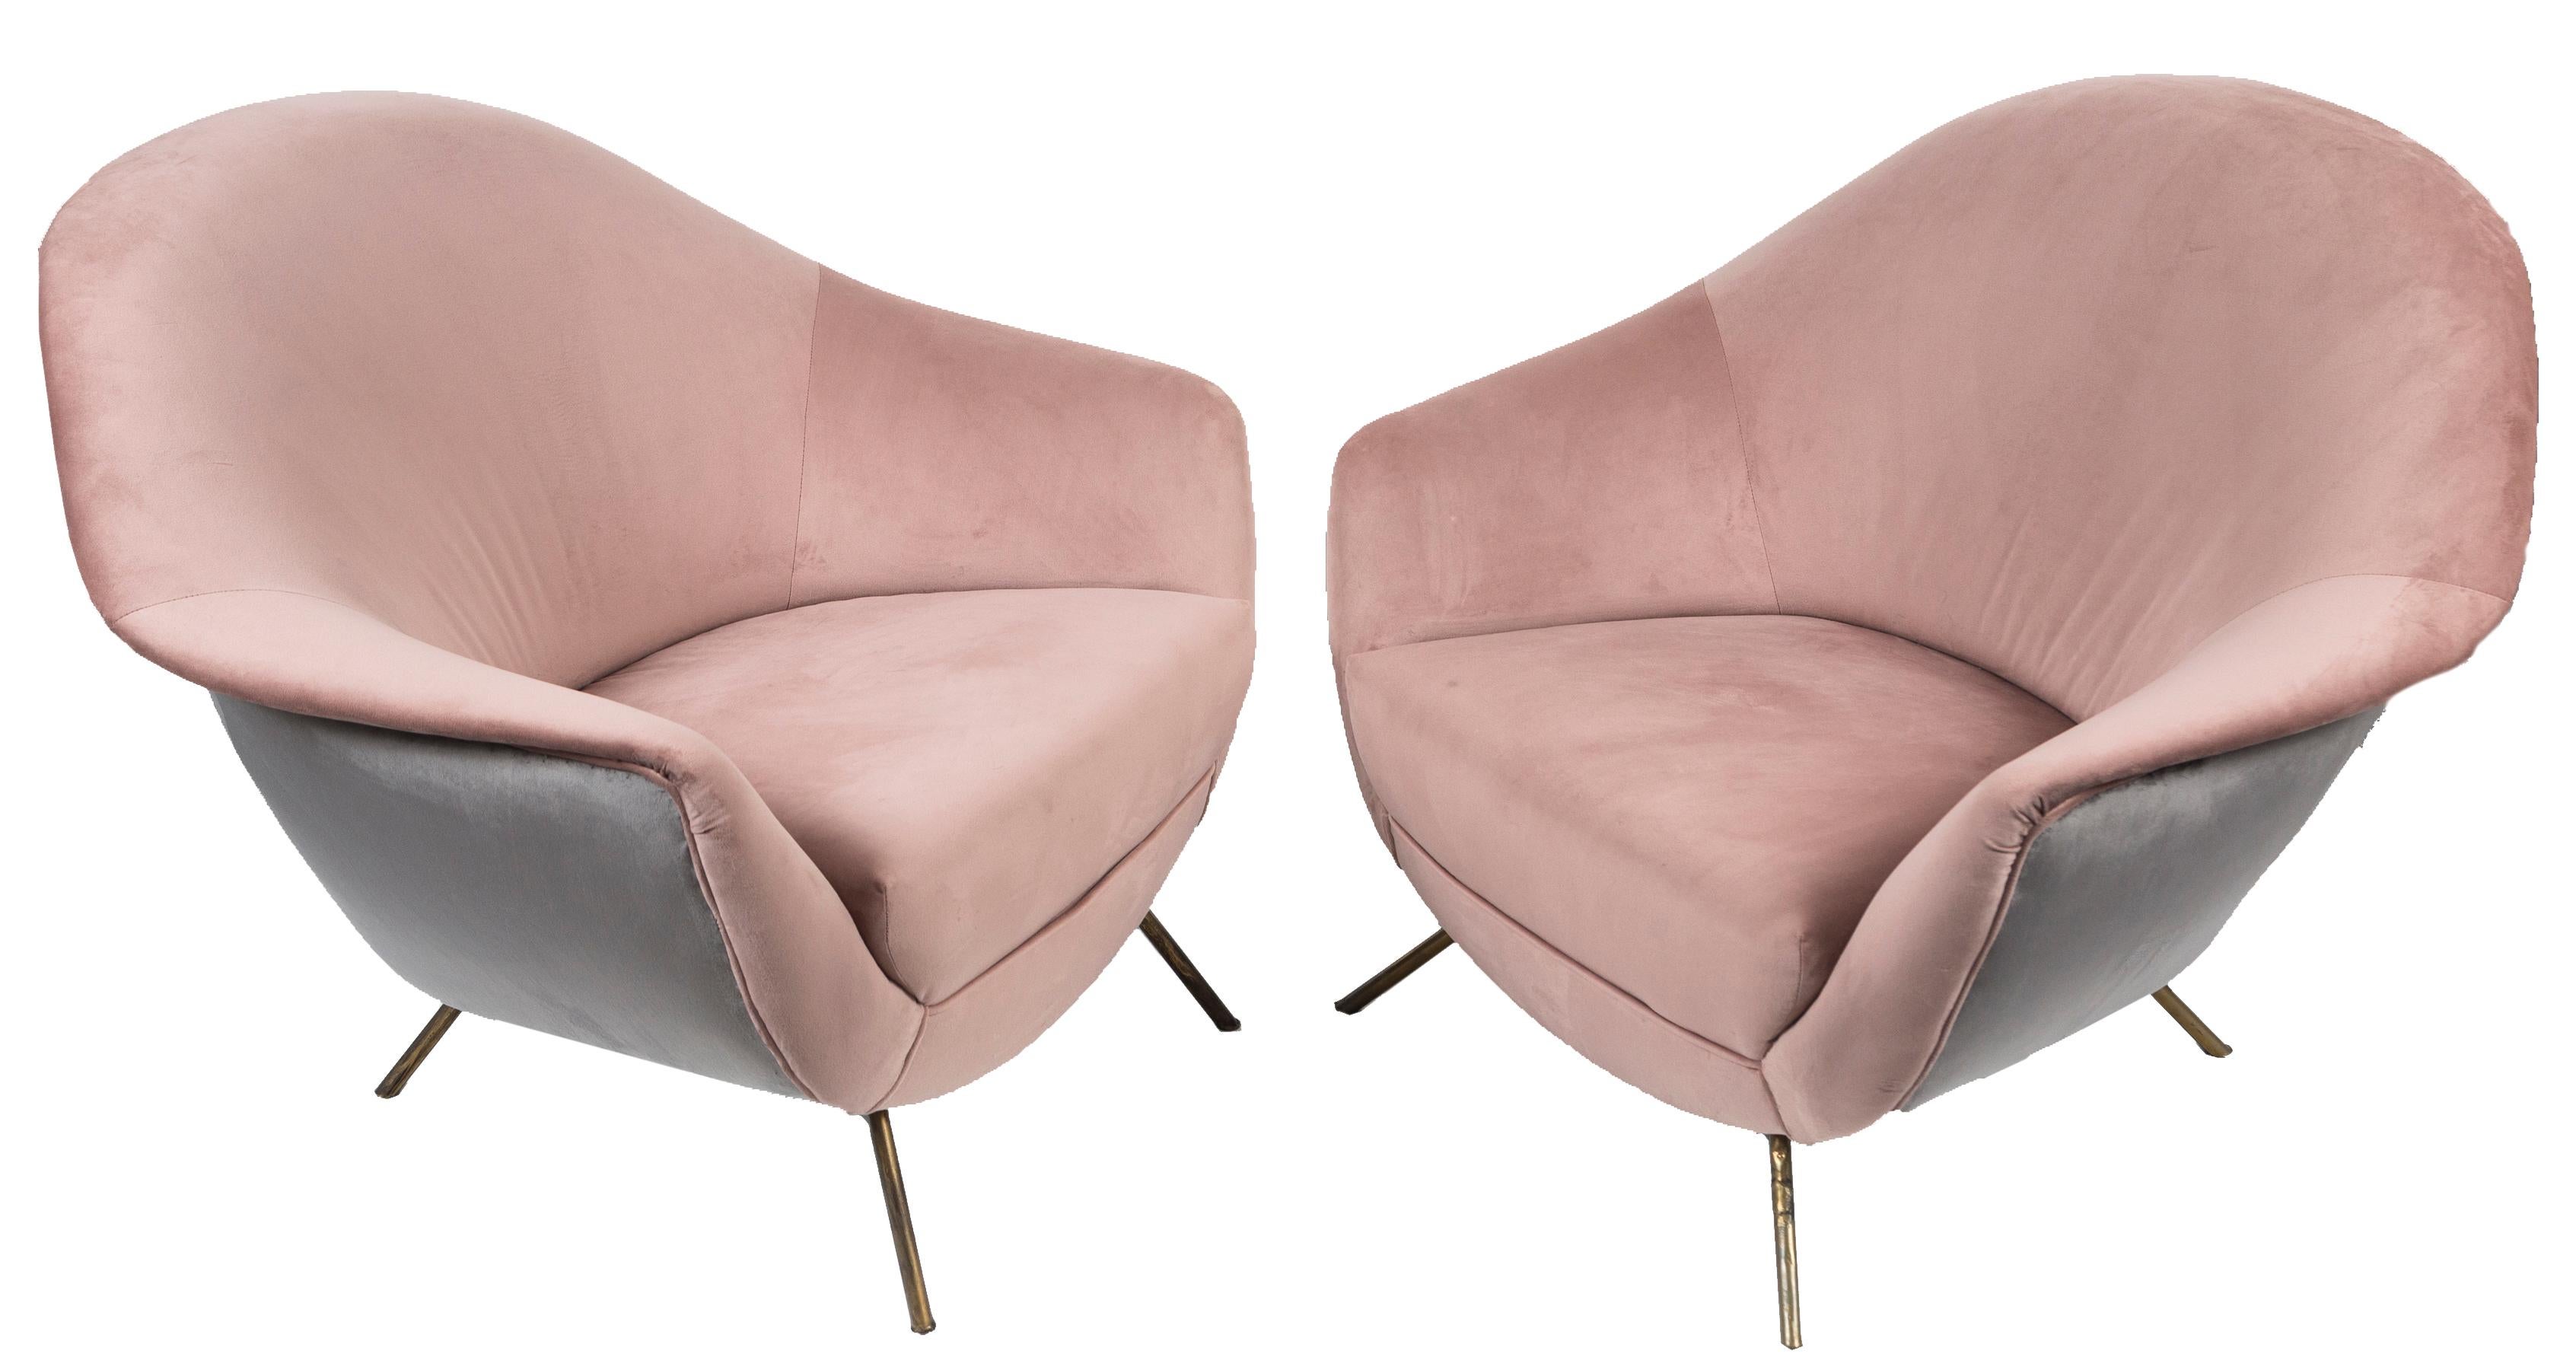 Lovely and compfortable pair of vintage barrel back lounge chairs with newly upholstered dusty rose and silver greige velour fabric. Leg frames in a chunky metal with x- supports .

Attributed Guglielmo Veronesi produced by ISA Bergamo
 
Condition: